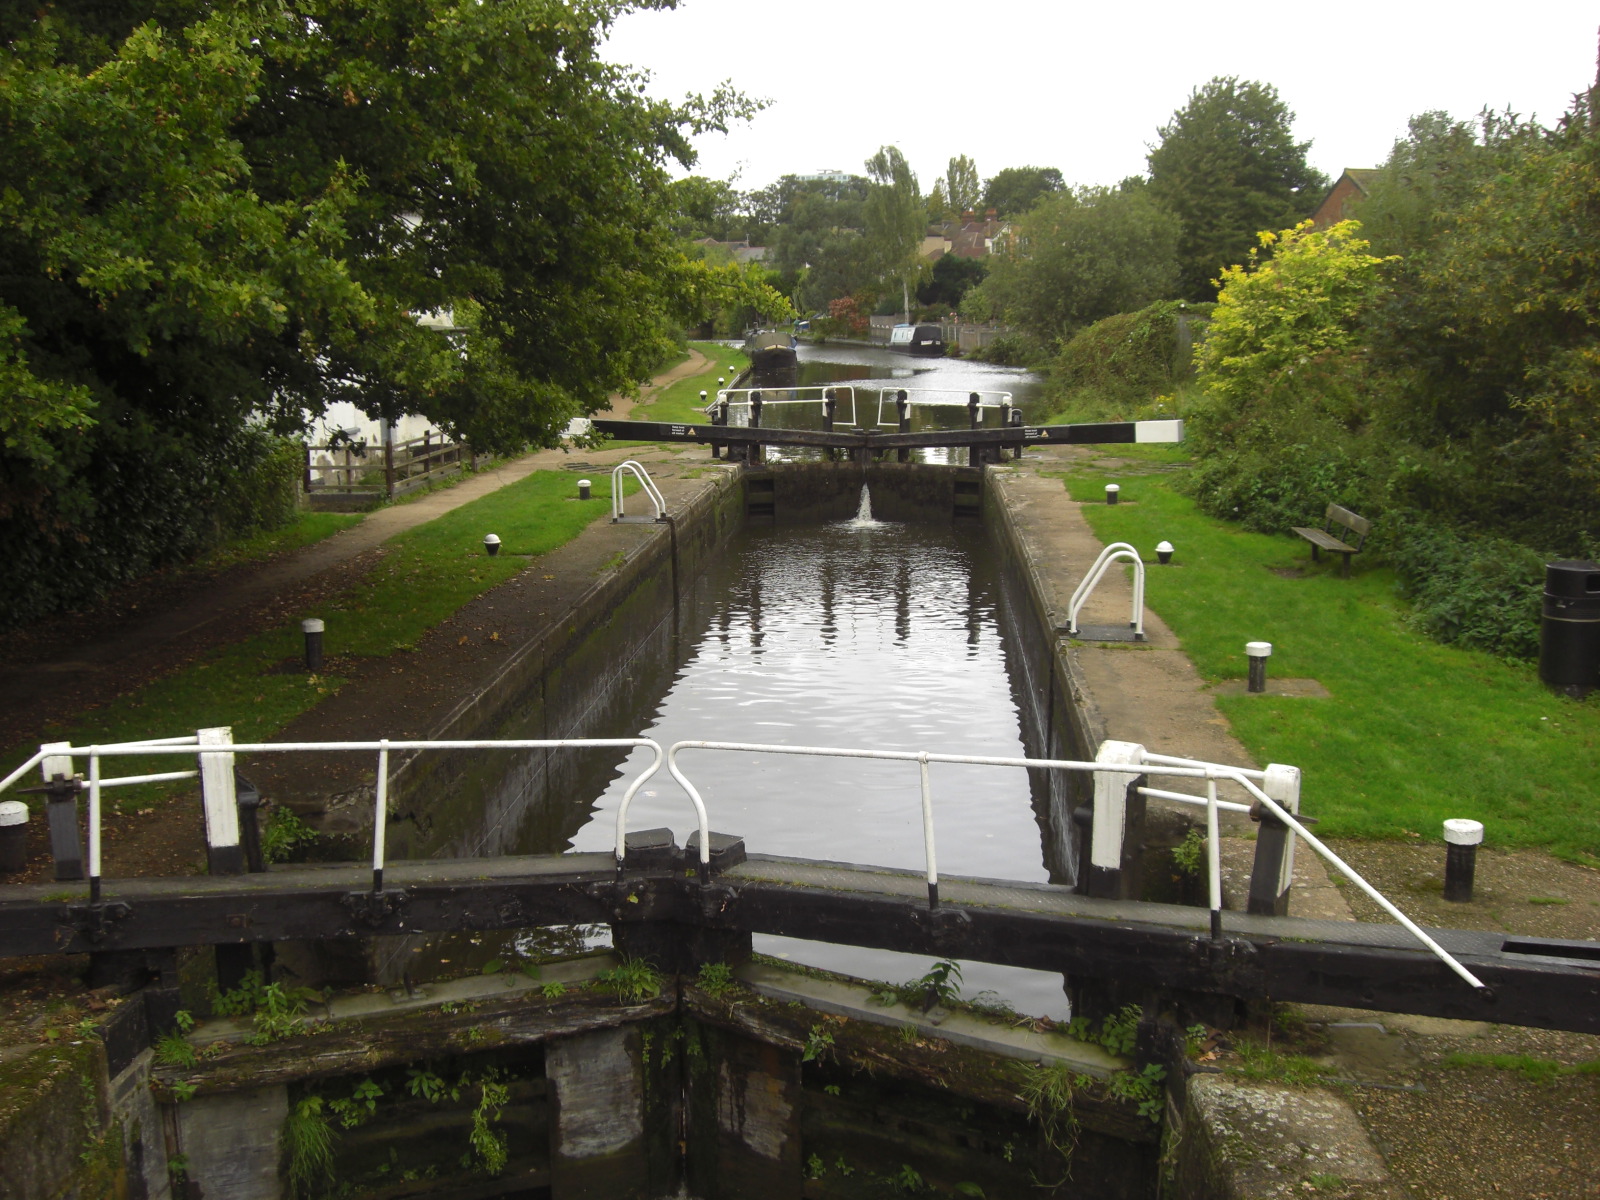 ... The Paper Mill (Apsley) to The Fishery Inn (Hemel Hempstead) and back